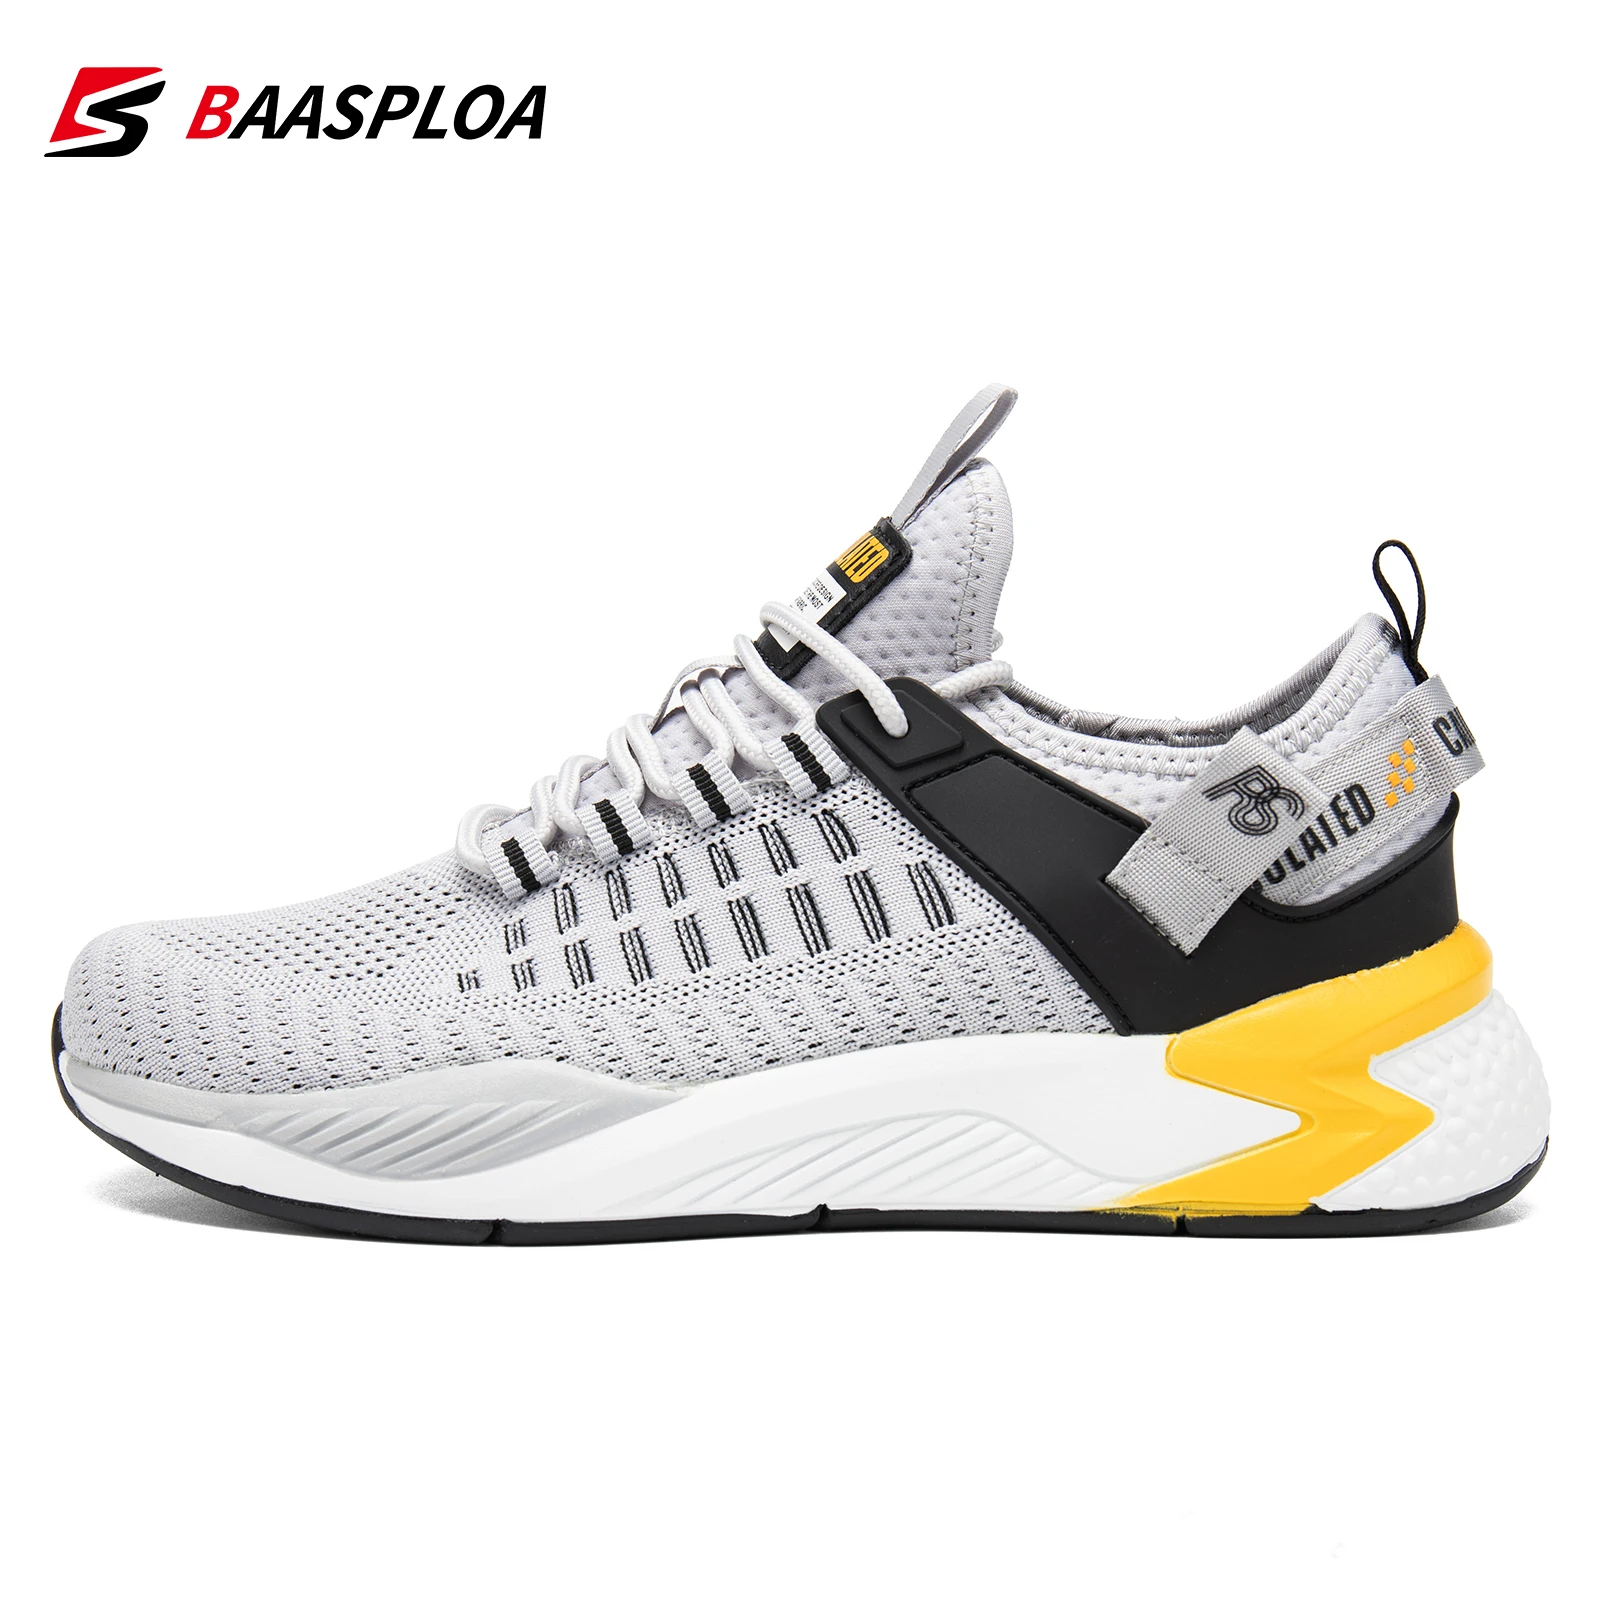 

Baasploa Men's Walking Shoes Fashion Lightweight Mesh Breathable Running Shoes Male Casual Non-slip Wear-resistant Sneakers